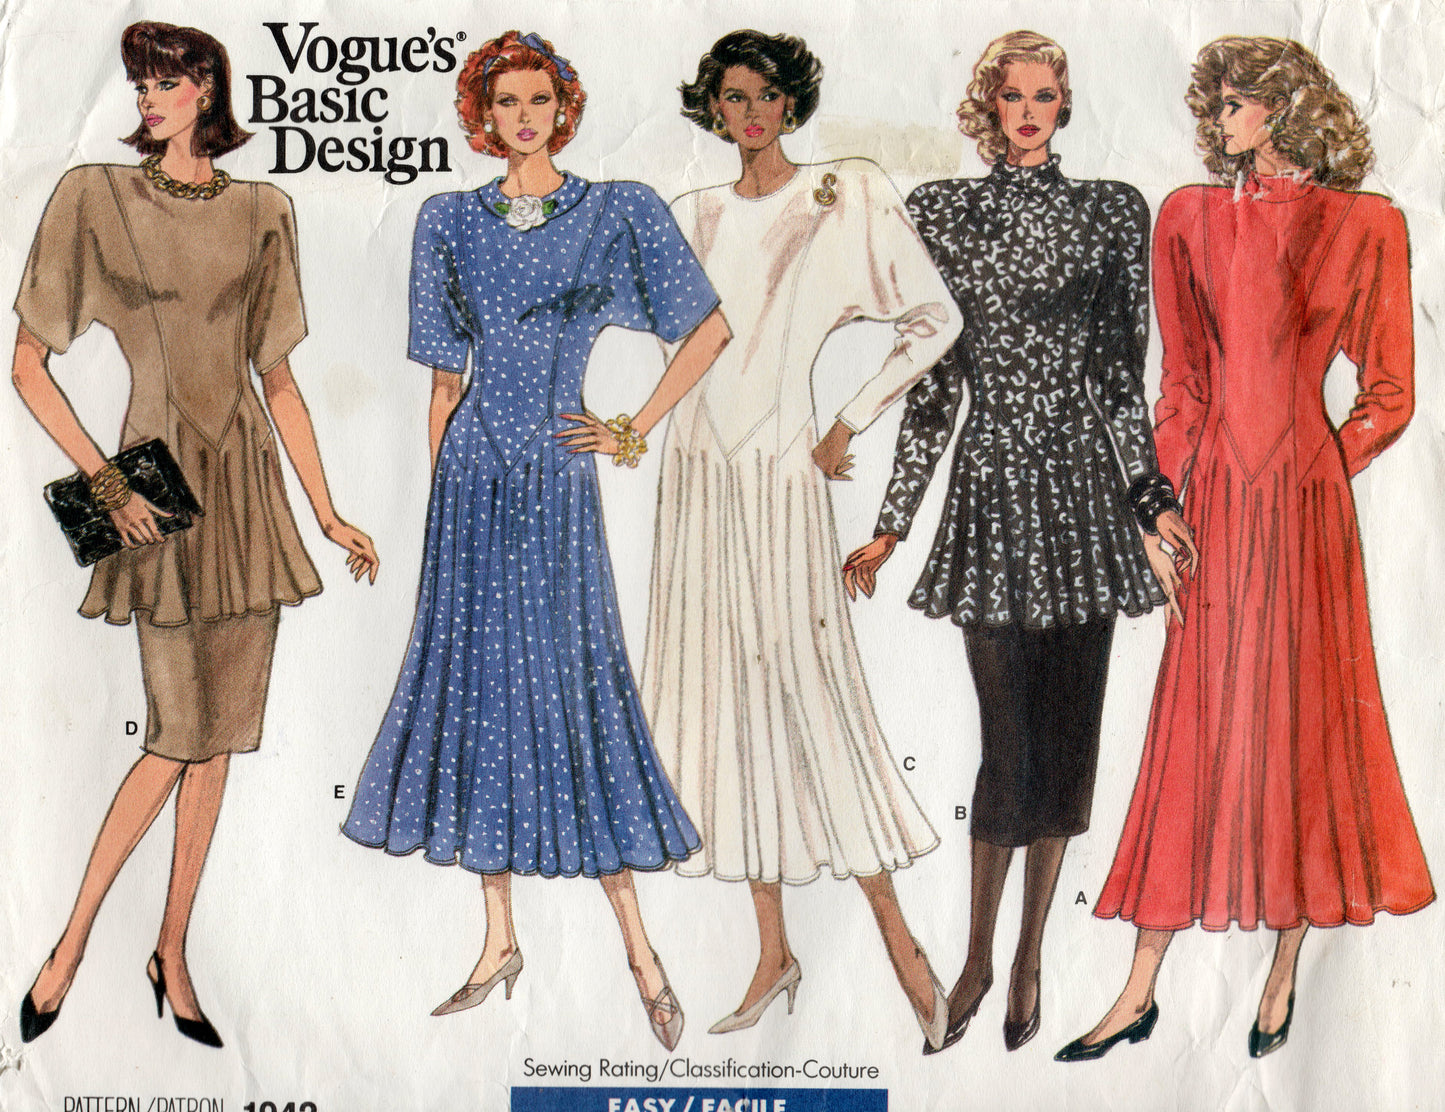 Vogue Basic Design 1942 Womens Dolman Sleeved Dress Tunic & Skirt 1980s Vintage Sewing Pattern Size 8 - 12 or 14 - 18 UNCUT Factory Folded